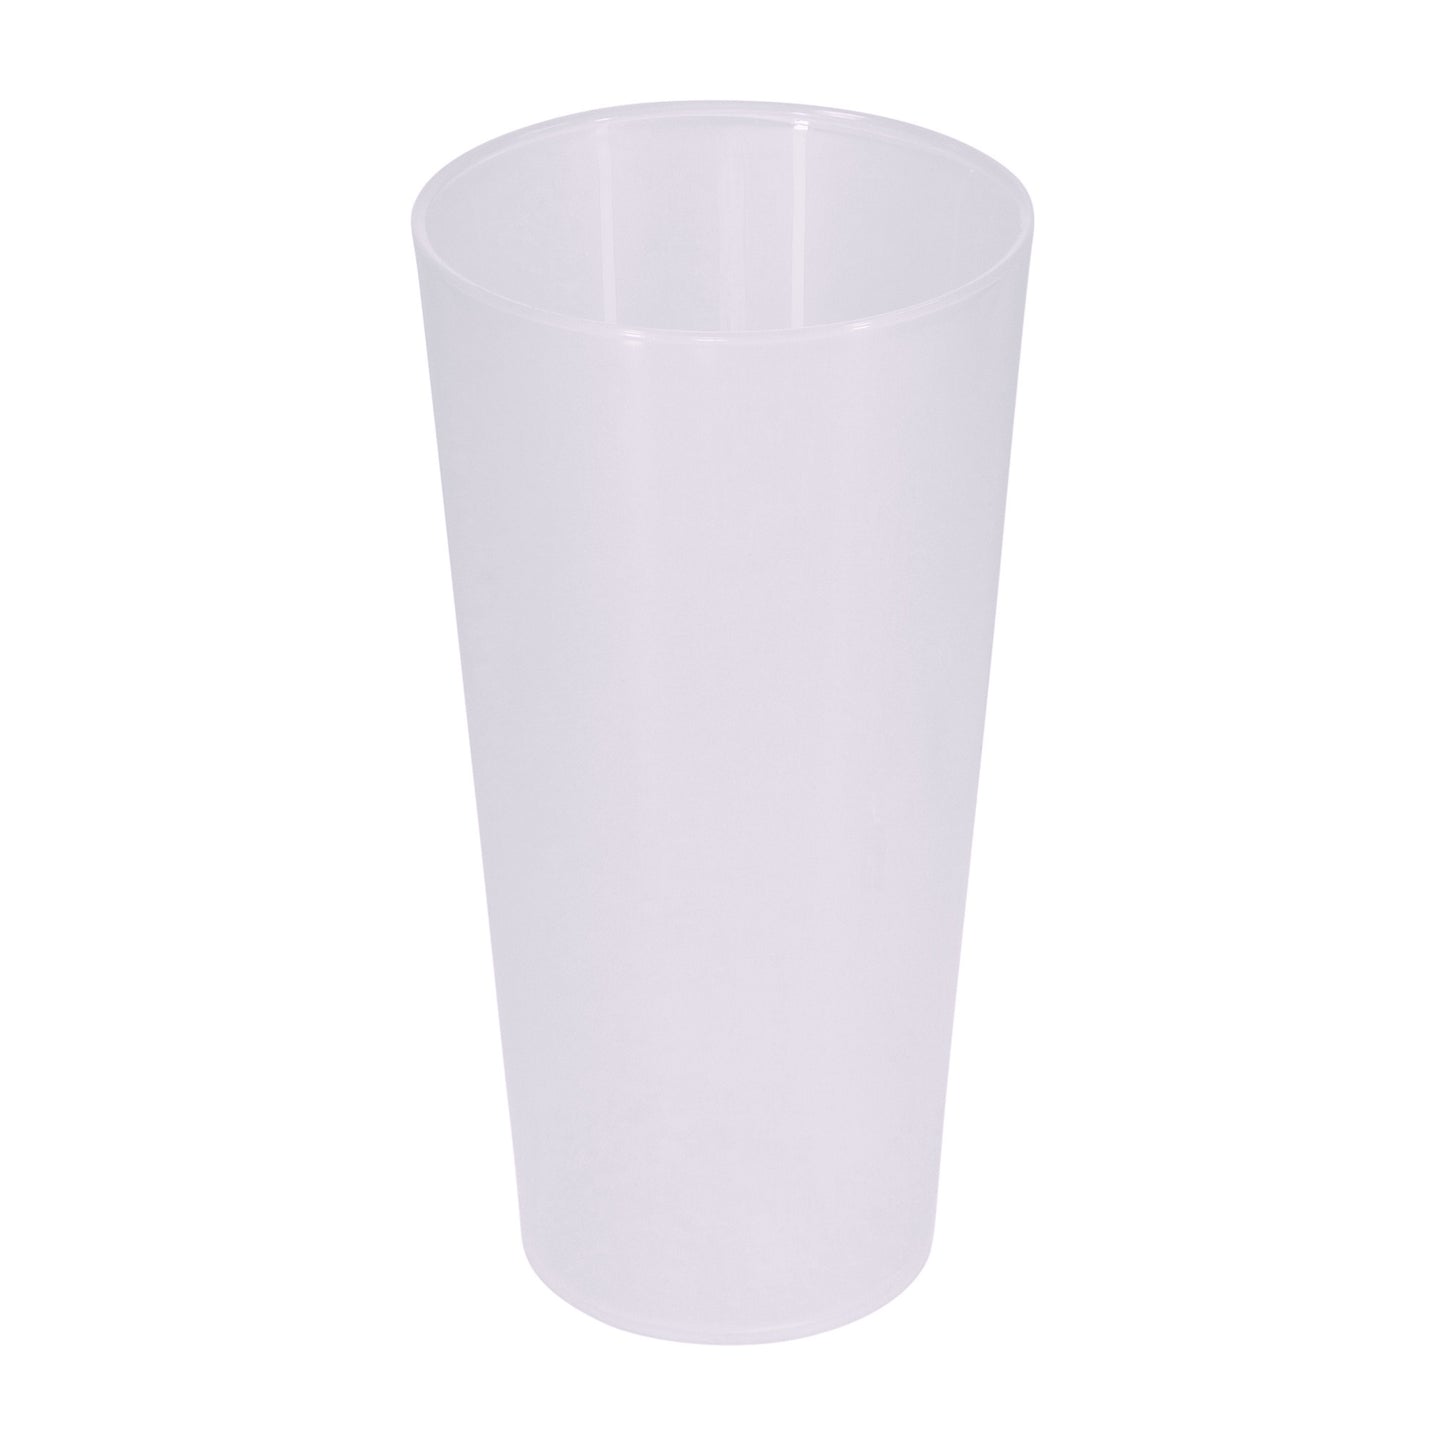 Pack of 50 Pint Cups Reusable Plastic - 1 Pint 568ml 20oz - Dishwasher safe Strong Straight edge Glasses for Beer, Soft Drinks, Water